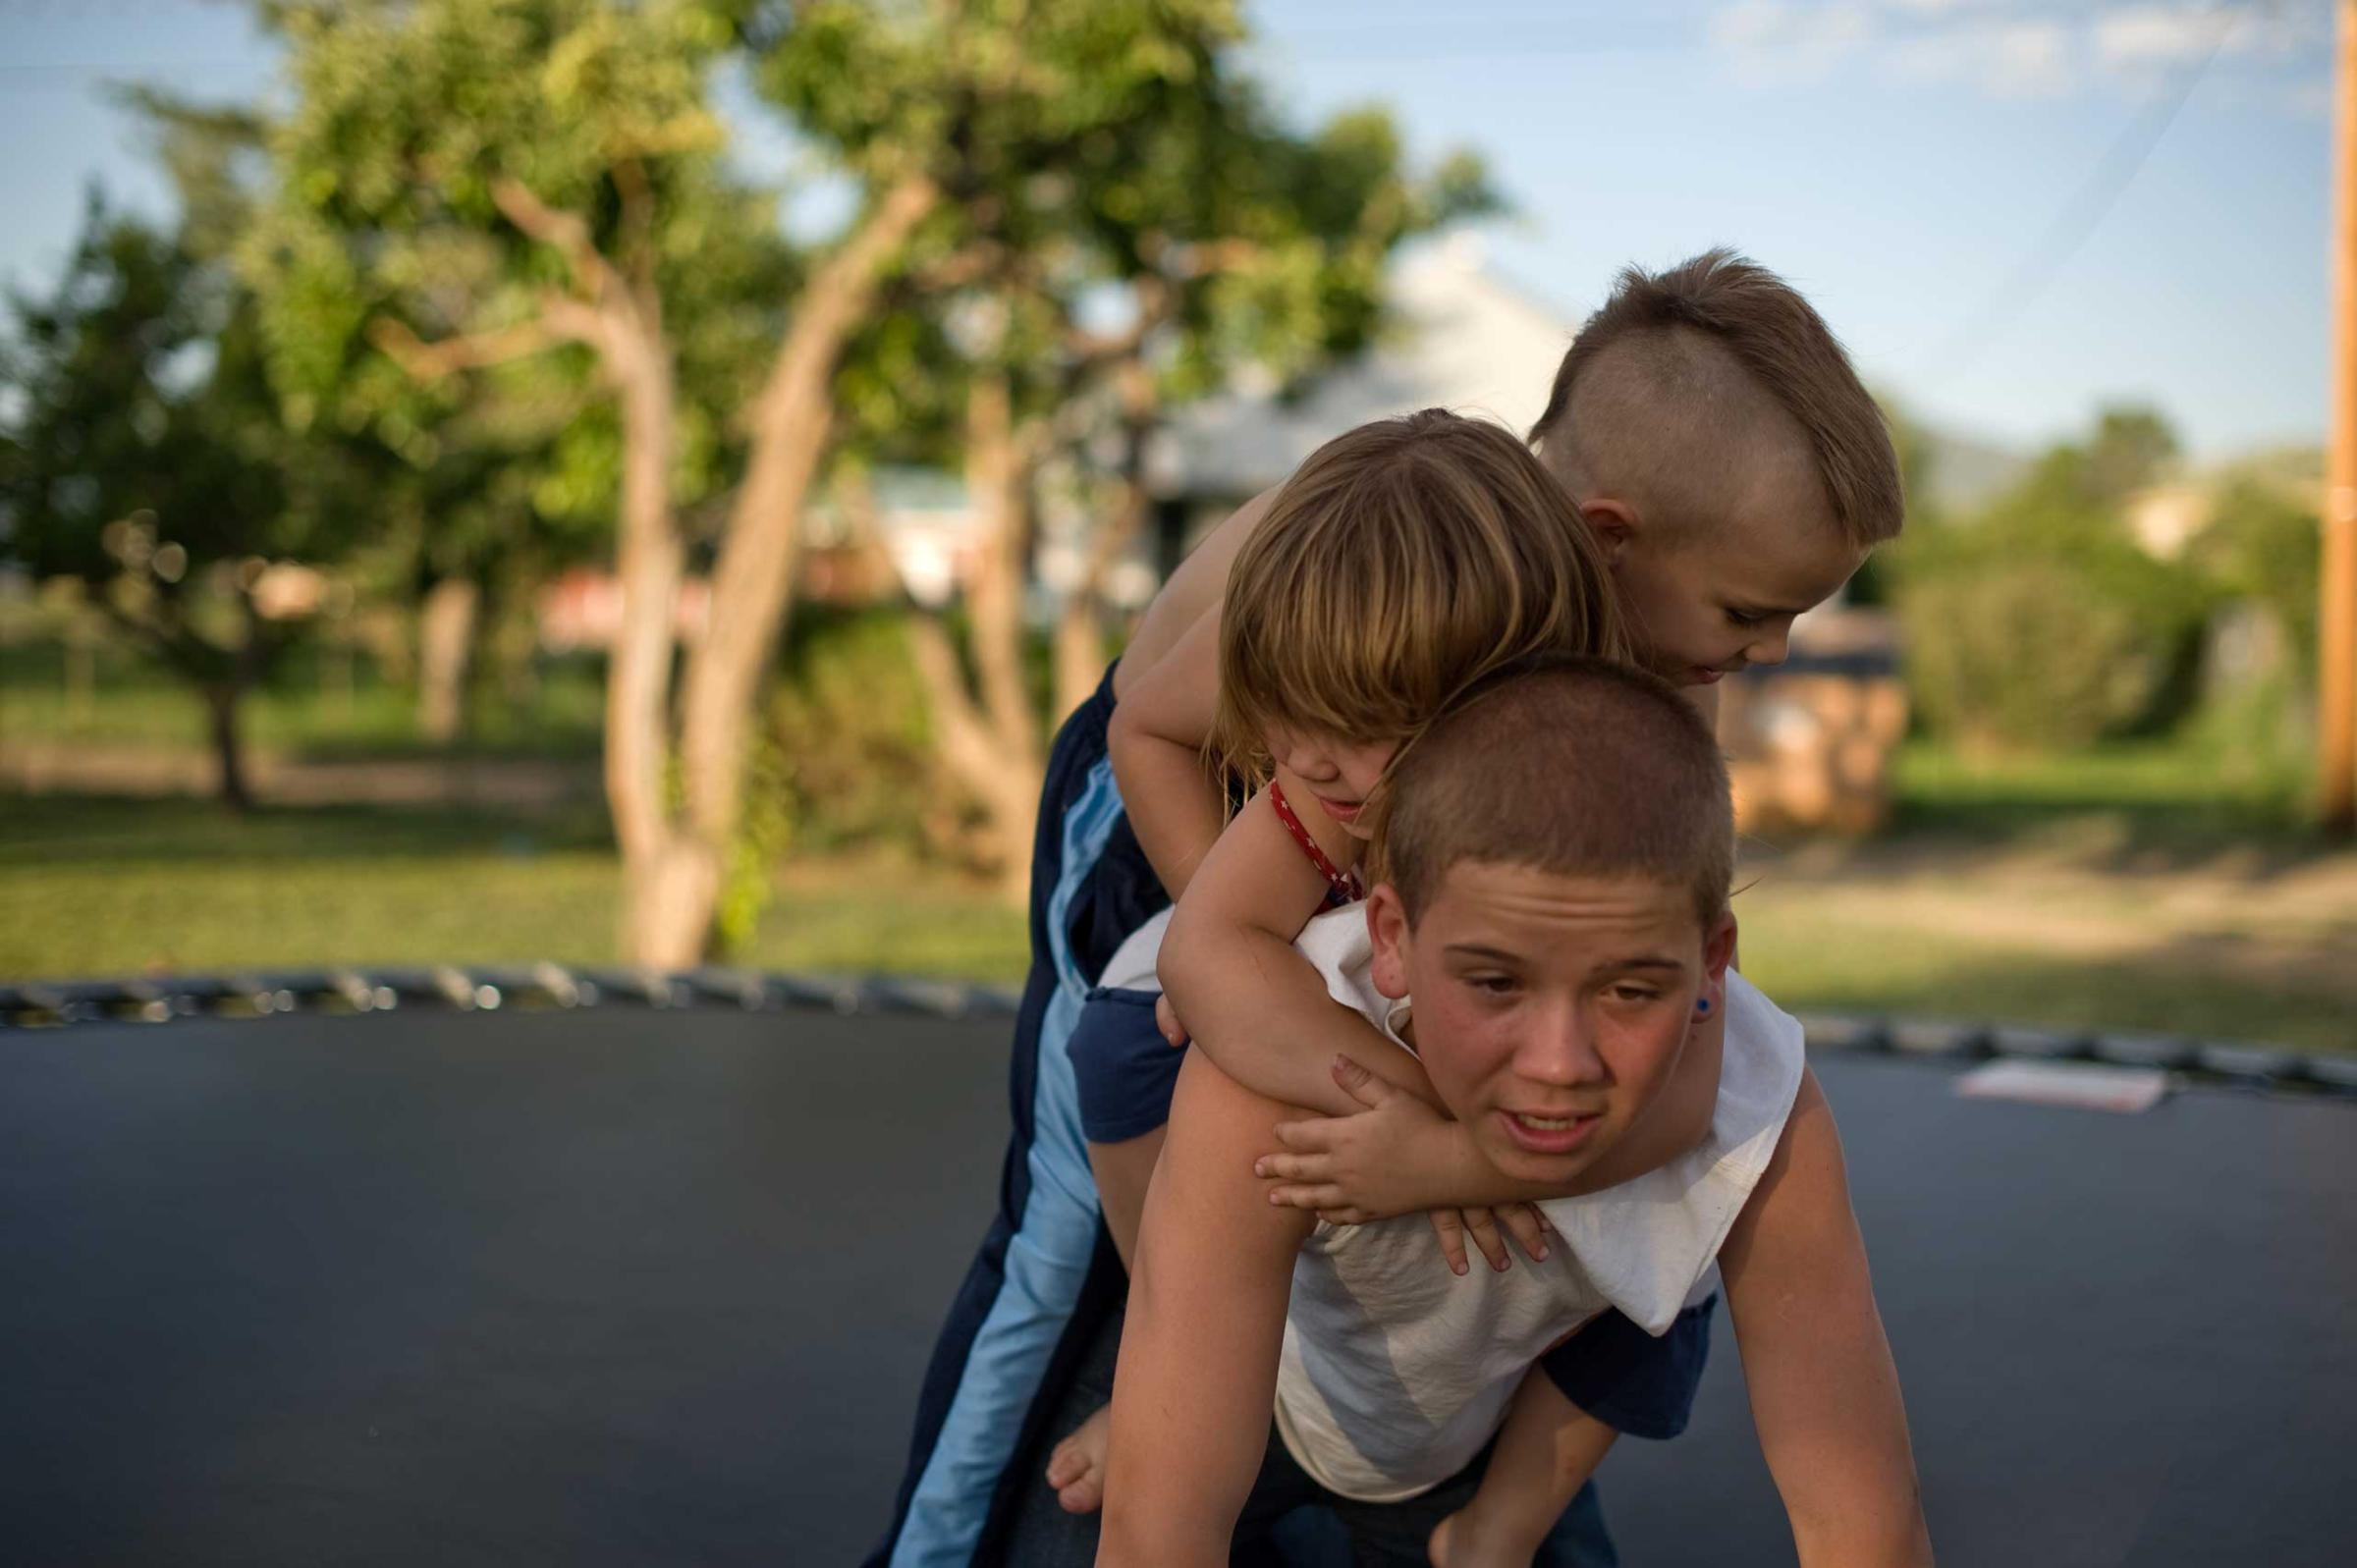 Vinny, Michael and Elycia play together on a trampoline. This is Vinny's first visit with his siblings since beginning his new life with his aunt.